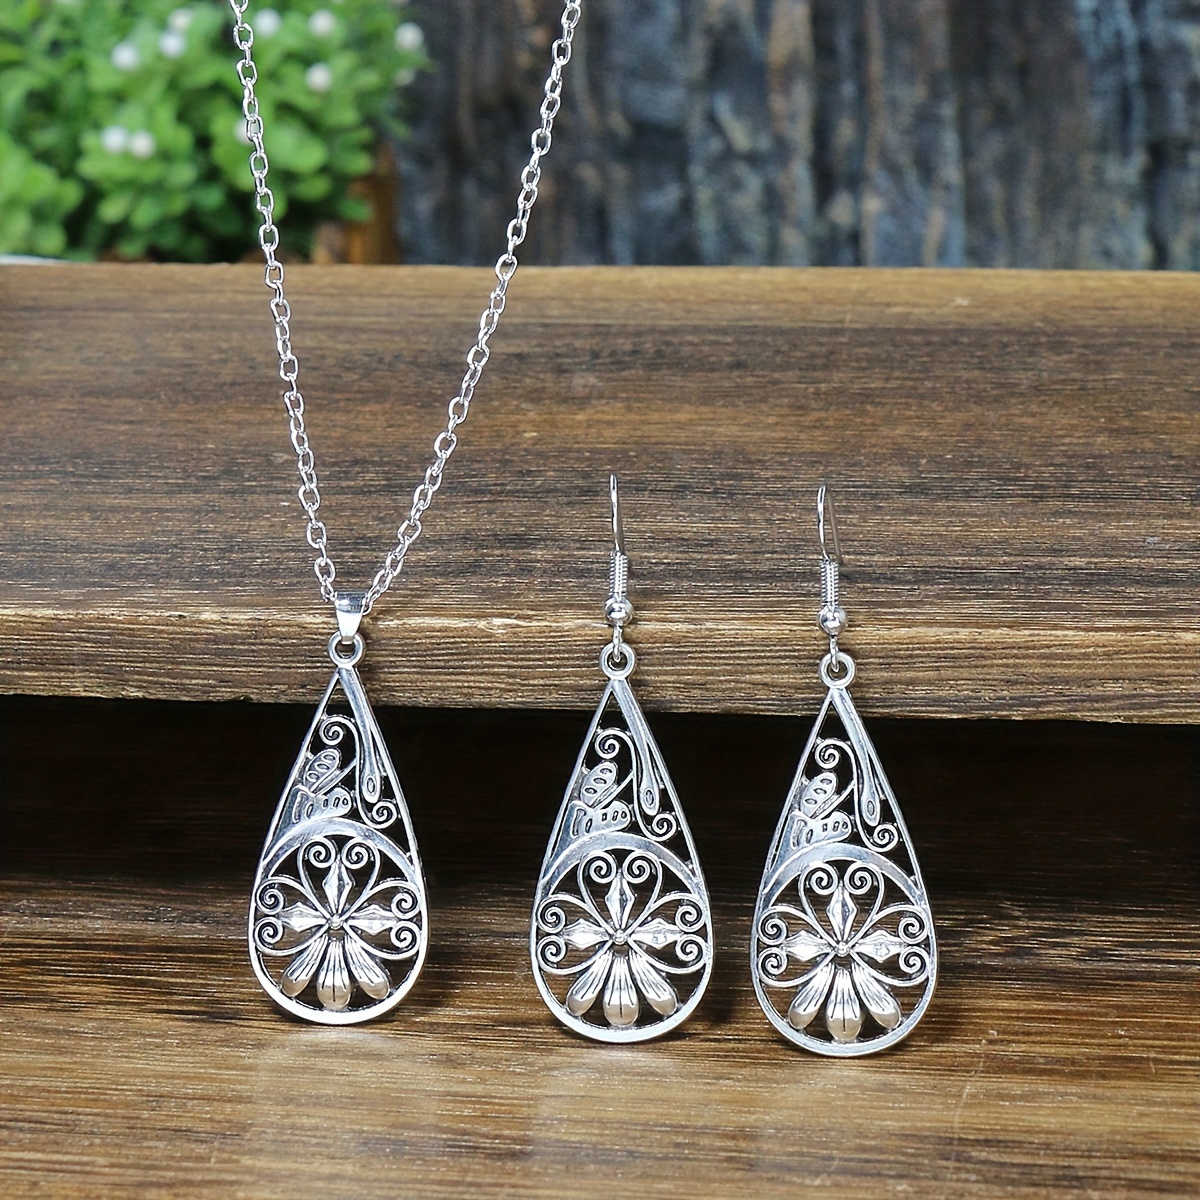 Simple Circle Jewelry Accessories Set Inlaid Rhinestones Pendant Necklace &  Stud Dangle Earrings Jewelry Gift For Women & Girls